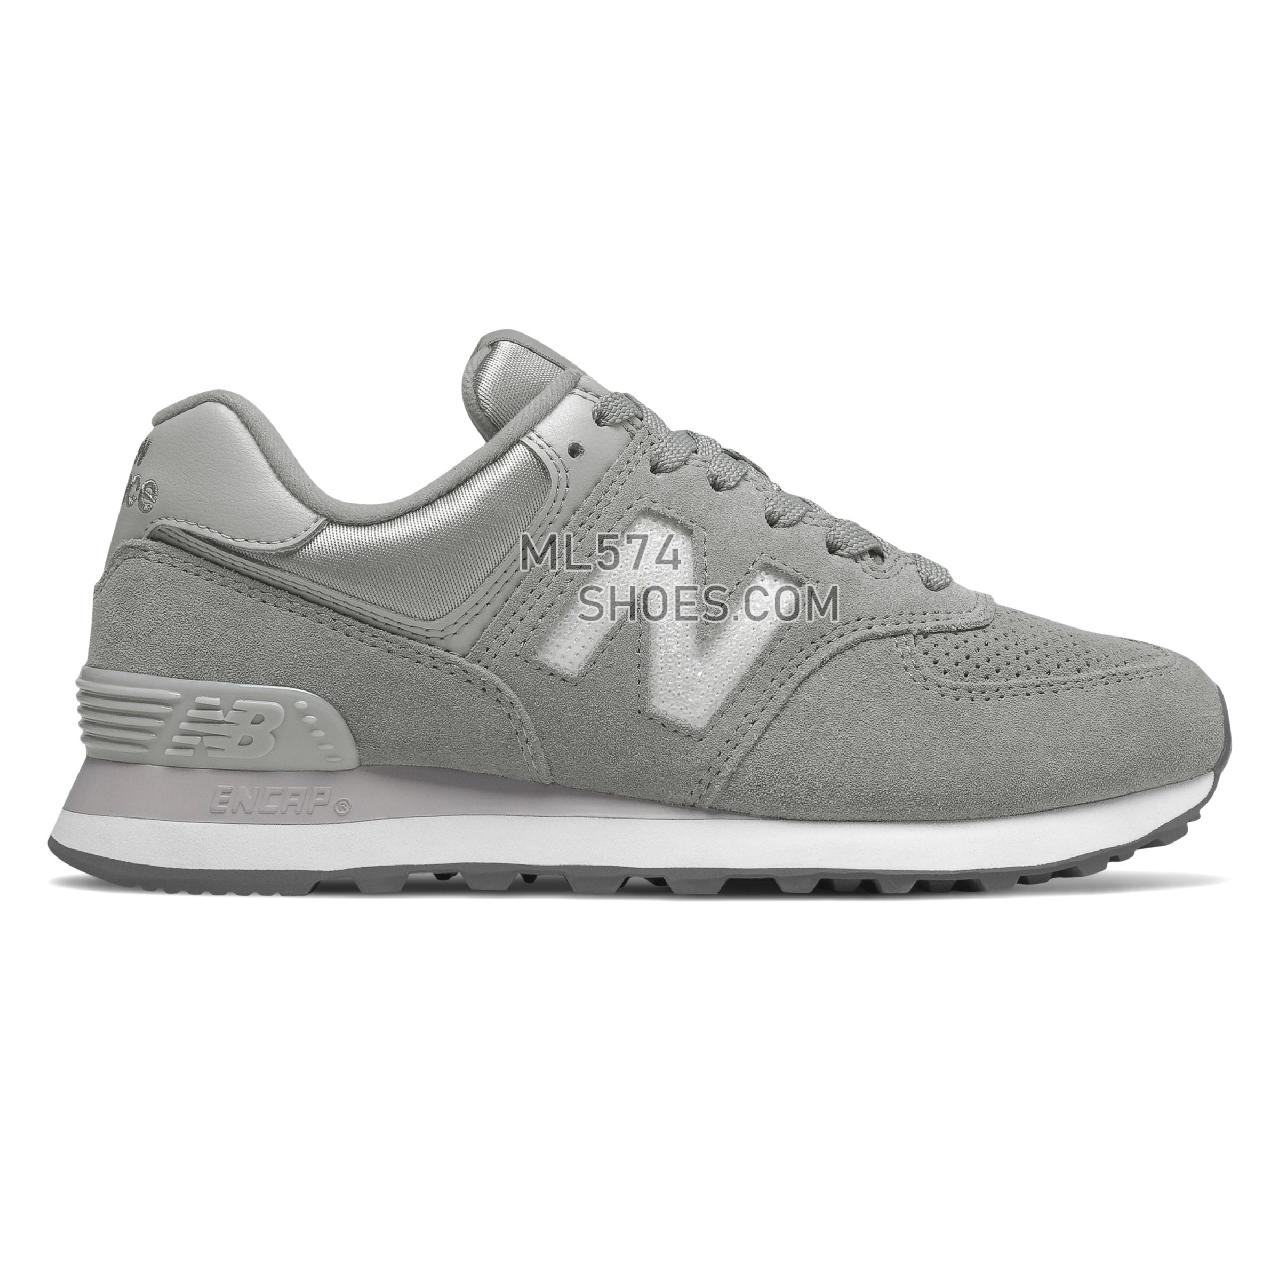 New Balance 574 Holiday Sparkler - Women's 574 - Classic Marblehead with Magnet - WL574FHC